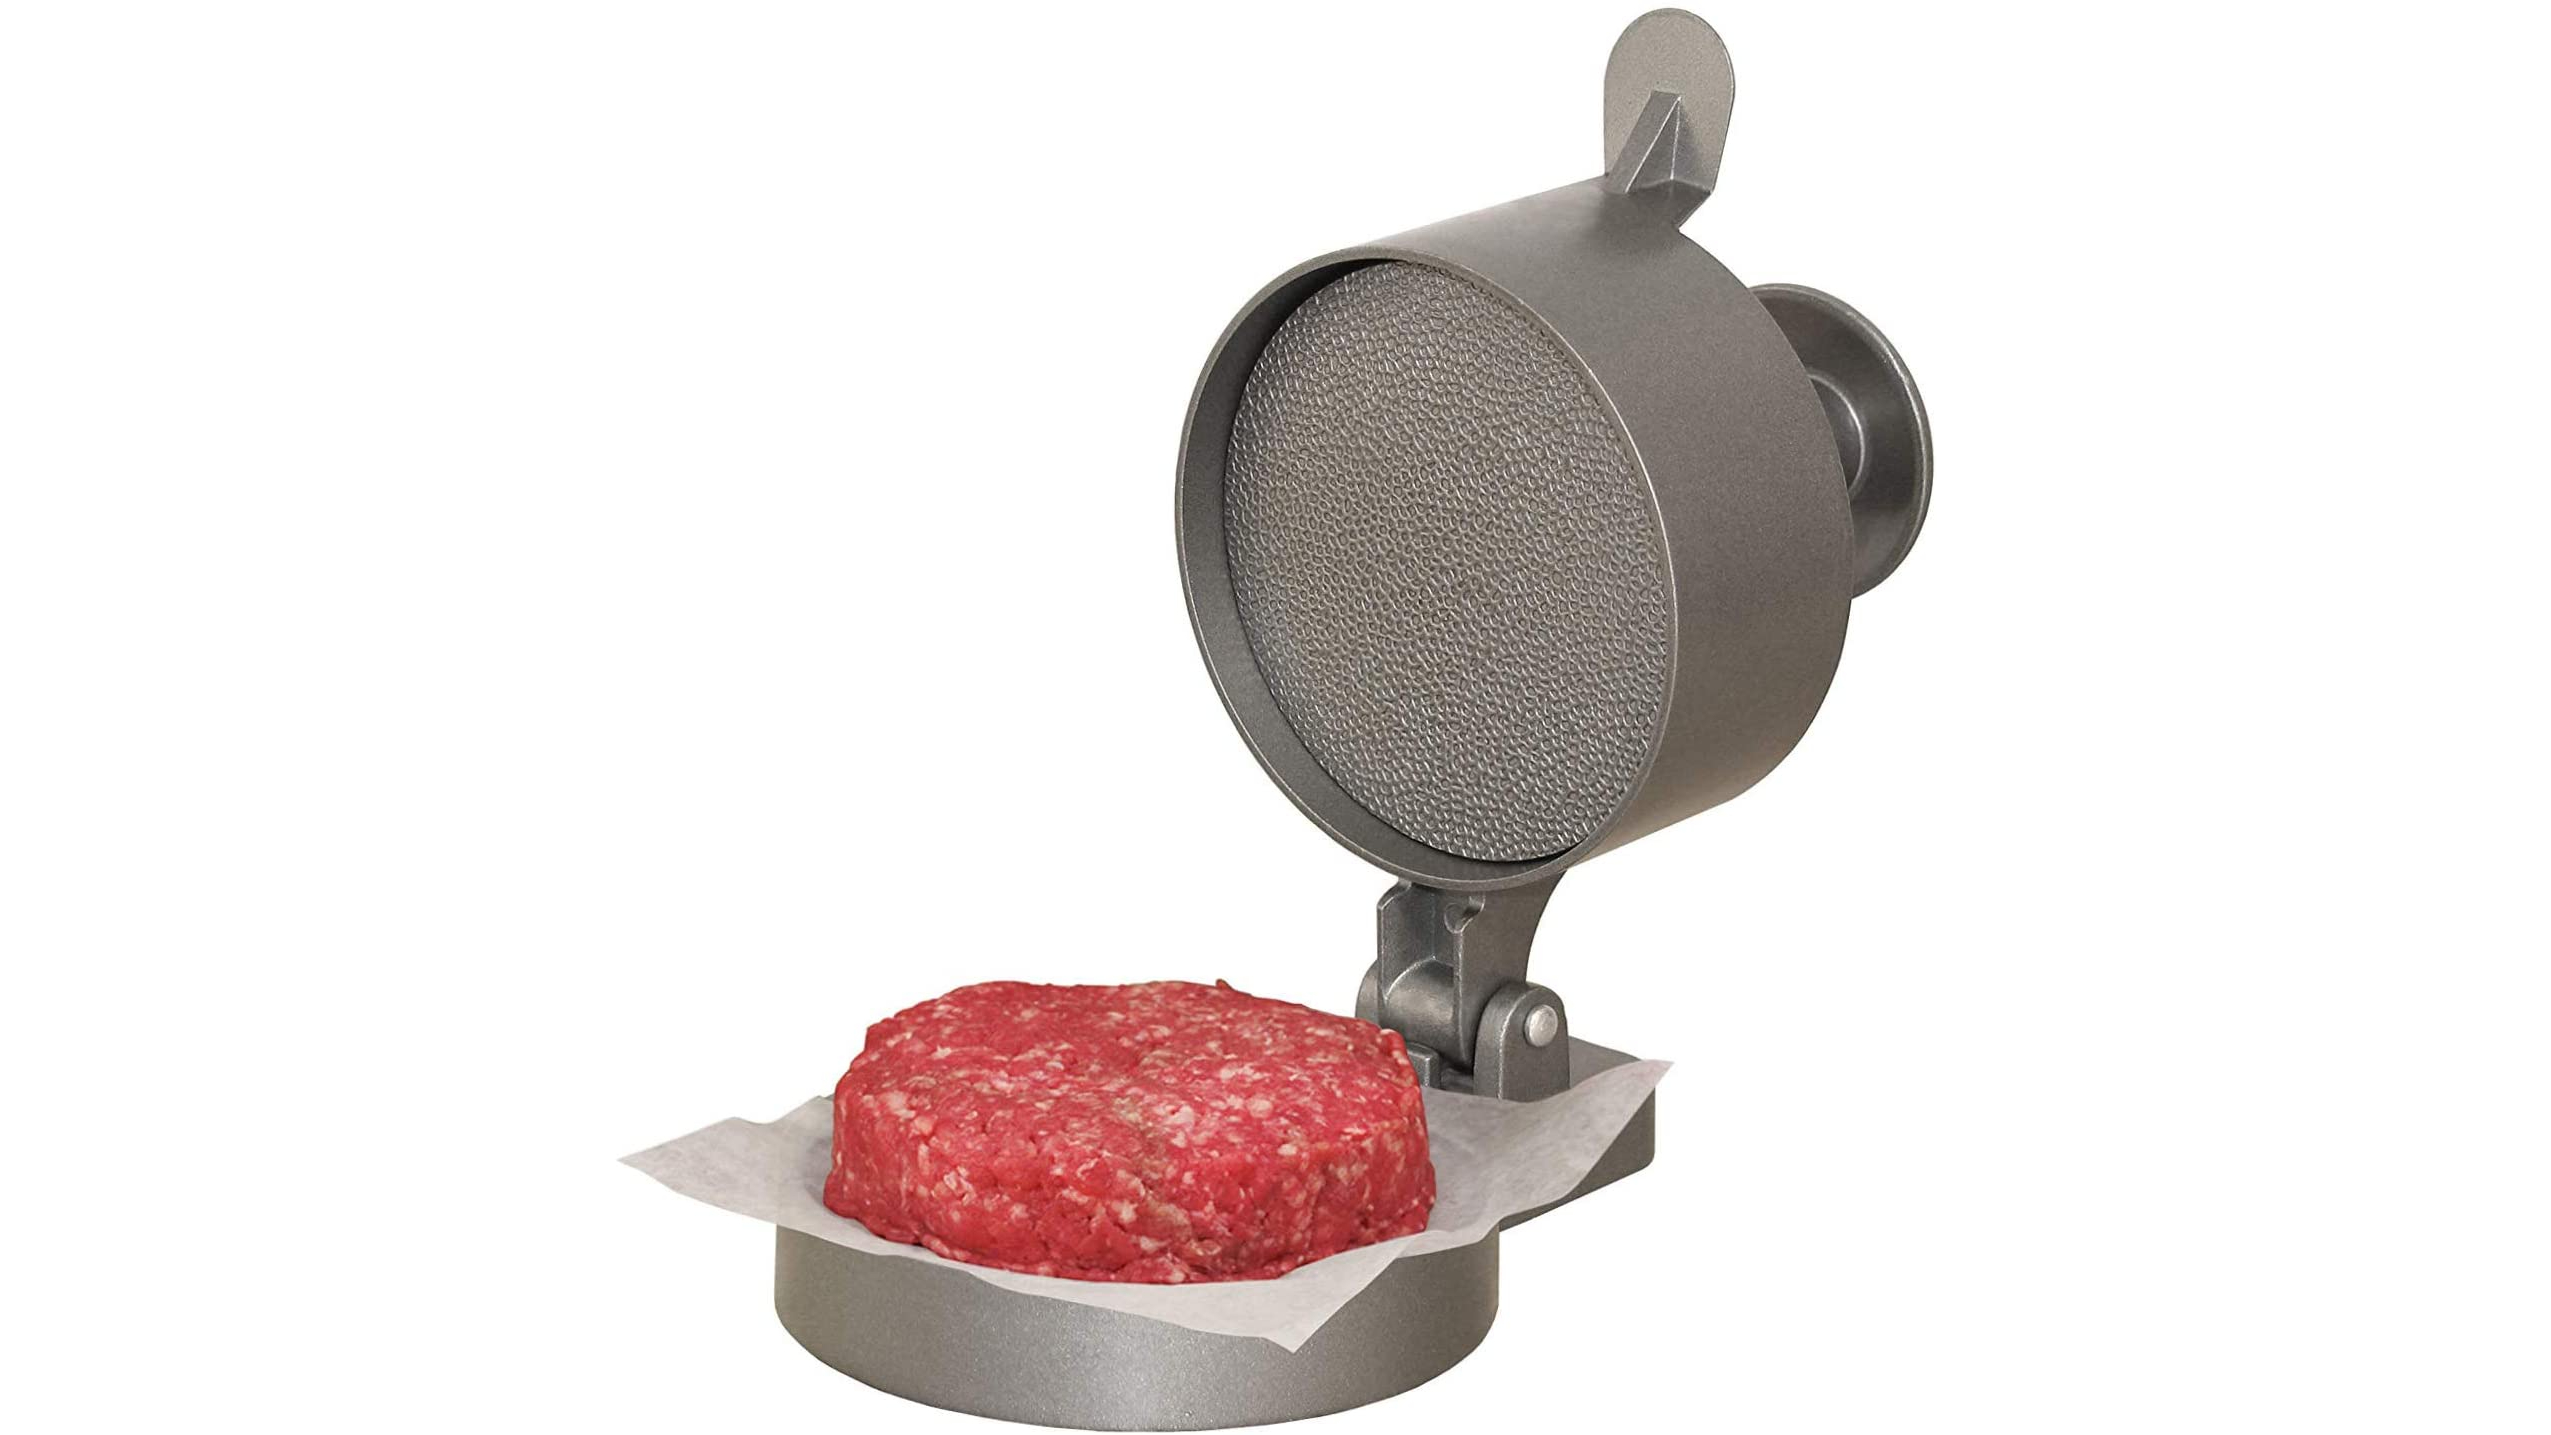 Want to Make the Perfect Burger? Use These Kitchen Tools - CNET